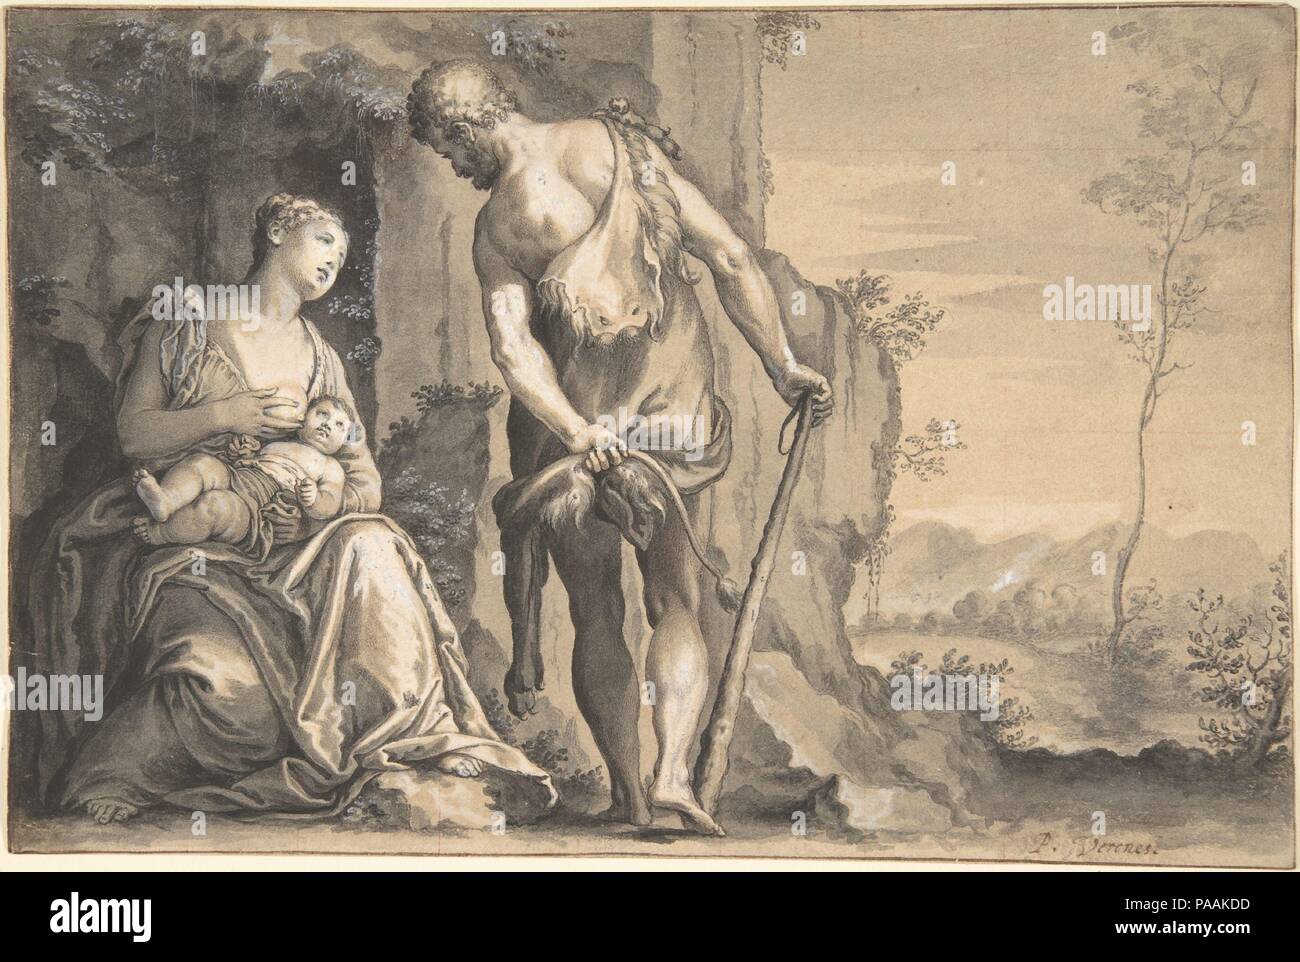 The Family of Cain. Artist: After Paolo Veronese (Paolo Caliari) (Italian, Verona 1528-1588 Venice); Peter Oliver (British, London, 1589/1594-1647 Isleworth, Middlesex). Dimensions: sheet: 7 1/16 x 10 11/16 in. (18 x 27.1 cm). Date: ca. 1638-47.  Peter Oliver, the leading miniature painter at the court of Charles I, established his reputation with a series of minute watercolor copies after old master paintings in the collections of the king and his nobles. The Family of Cain reproduces a painting by Paolo Veronese (Museo del Prado, Madrid) presumably in England at the time. No watercolor versi Stock Photo